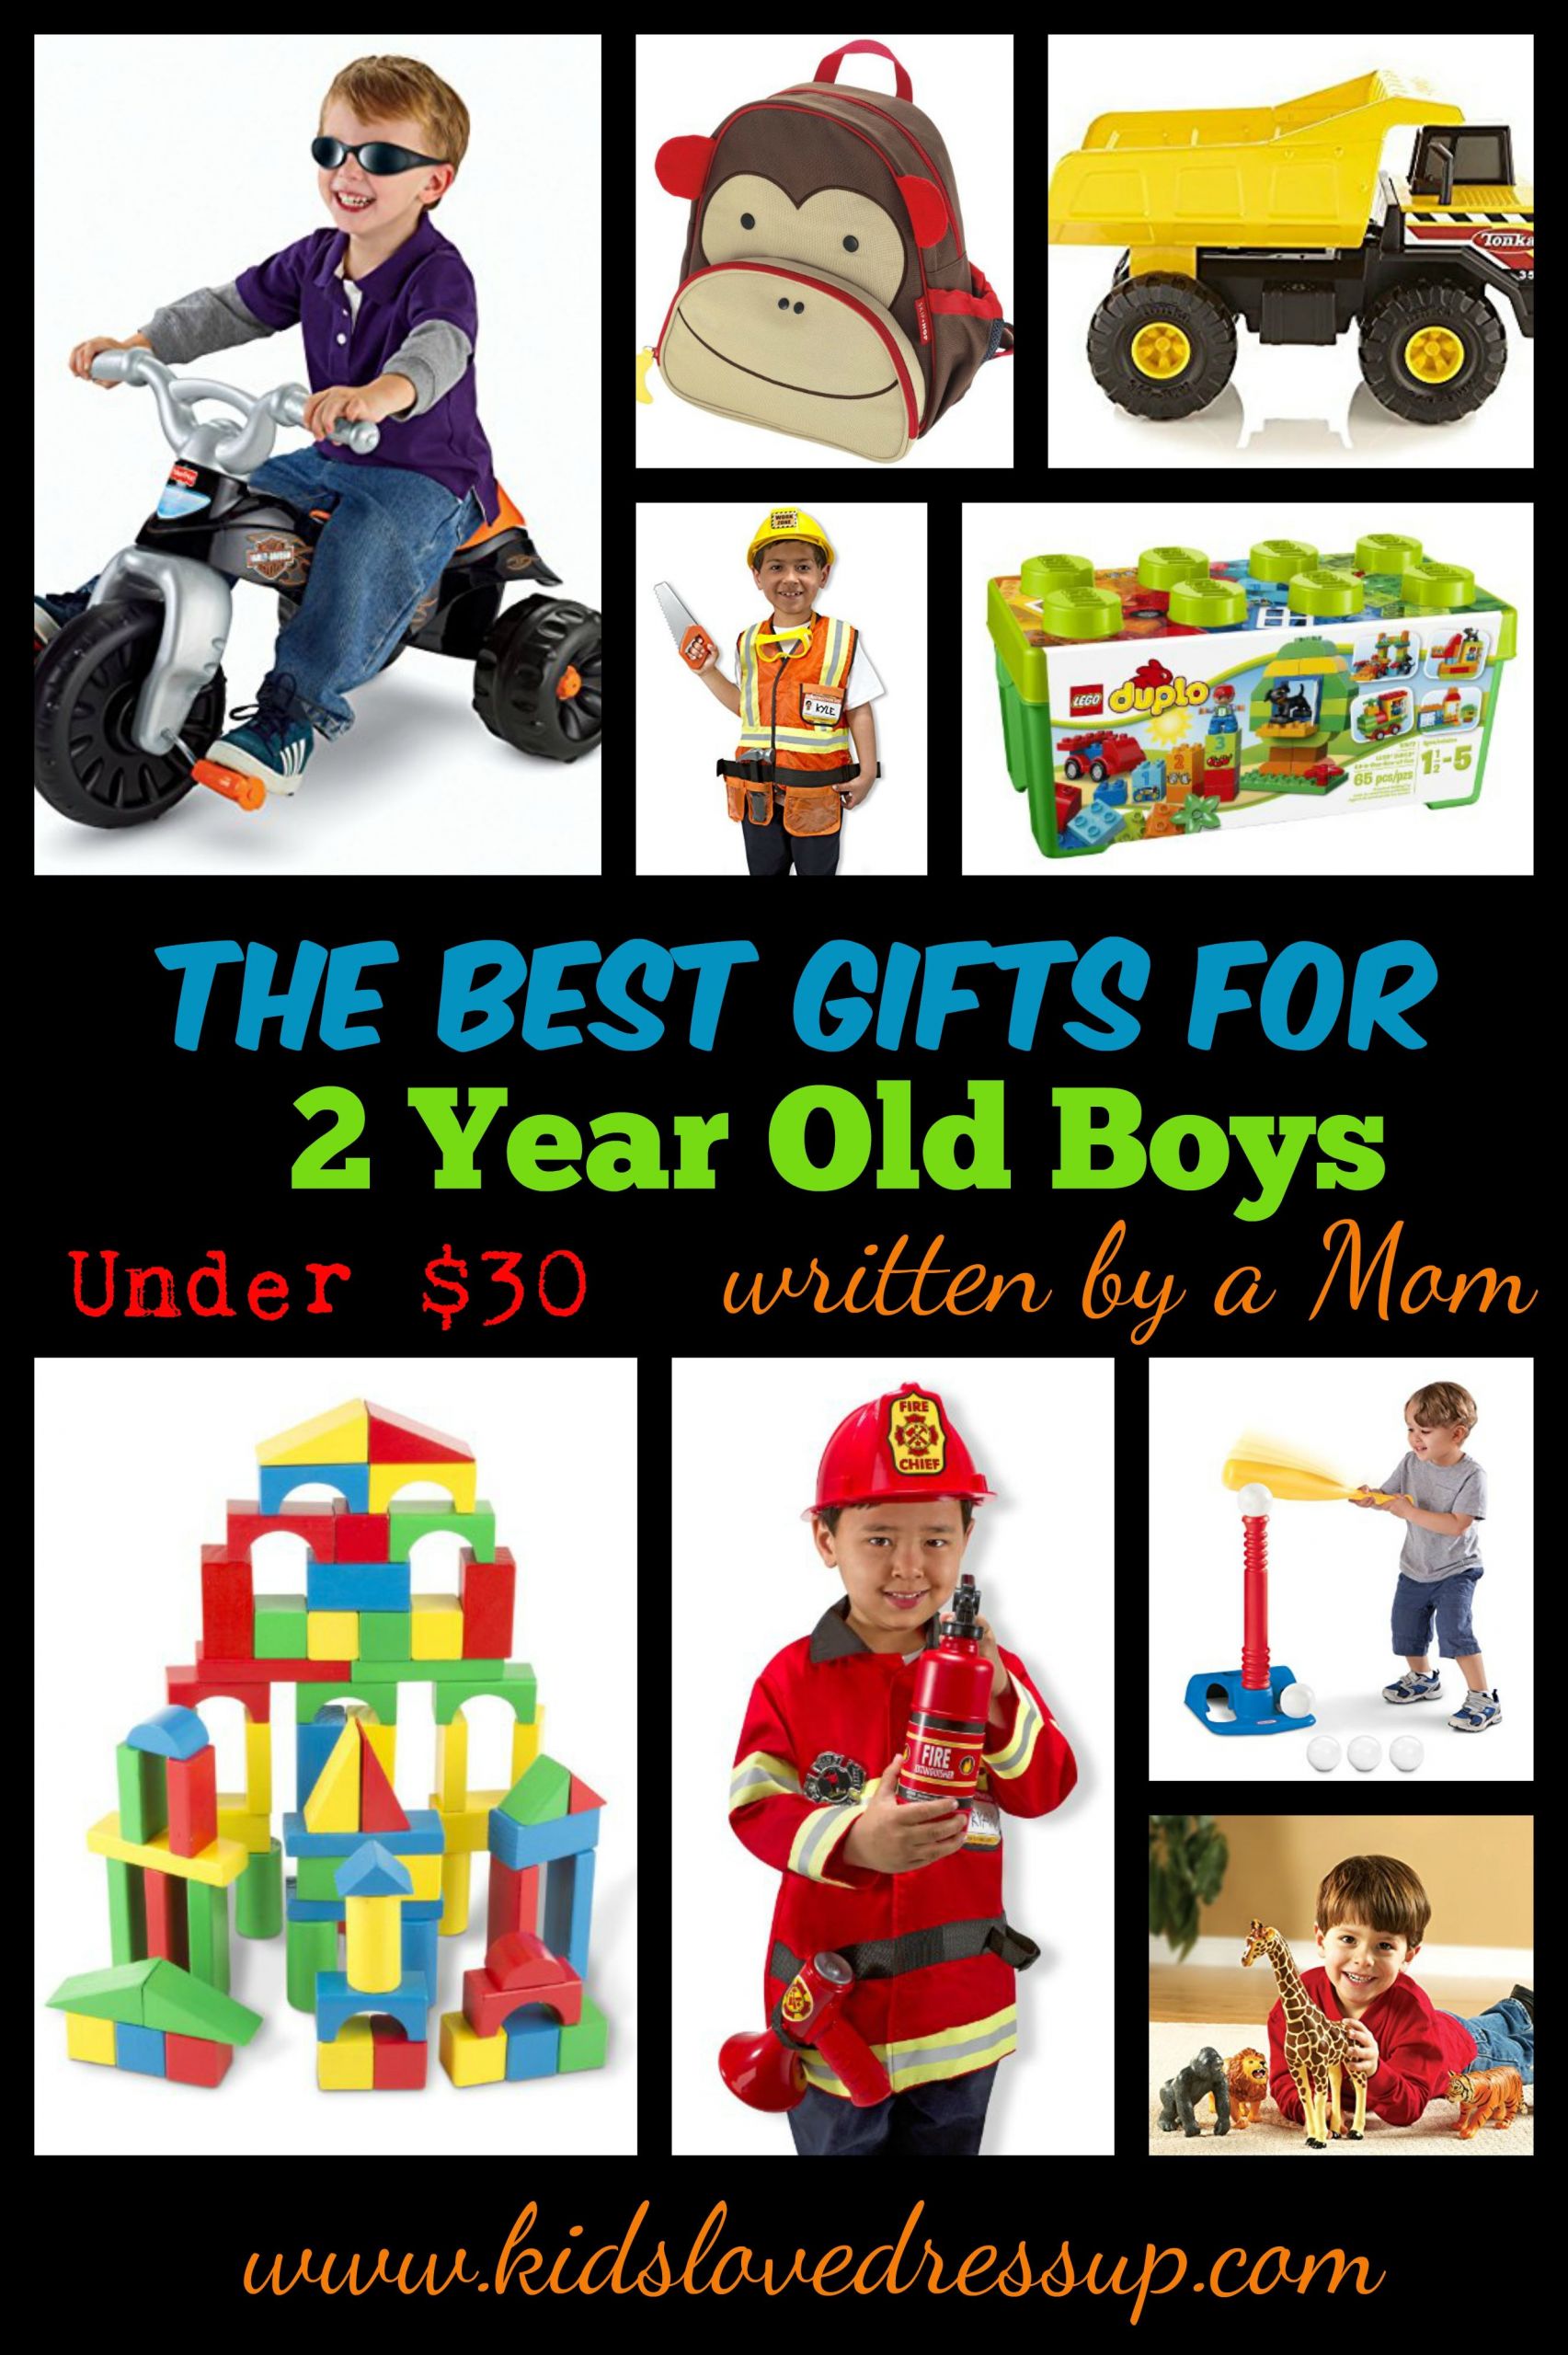 Gift Ideas For Two Year Old Boys
 Want to give the favorite t this year Gifts for 2 year